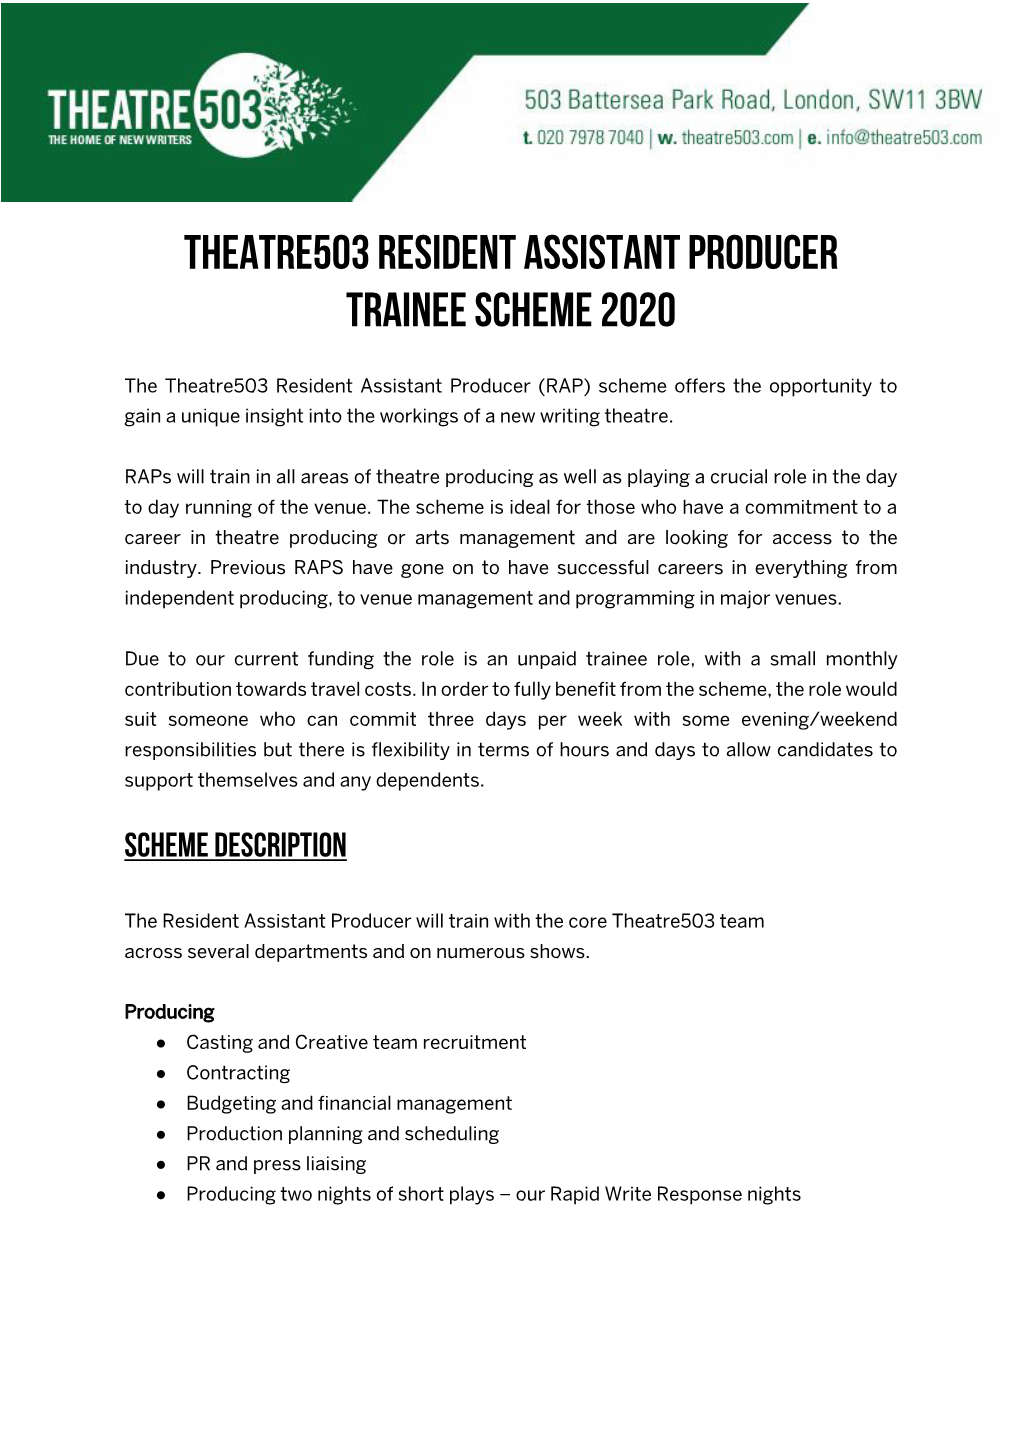 Theatre503 Resident Assistant Producer Trainee Scheme 2020